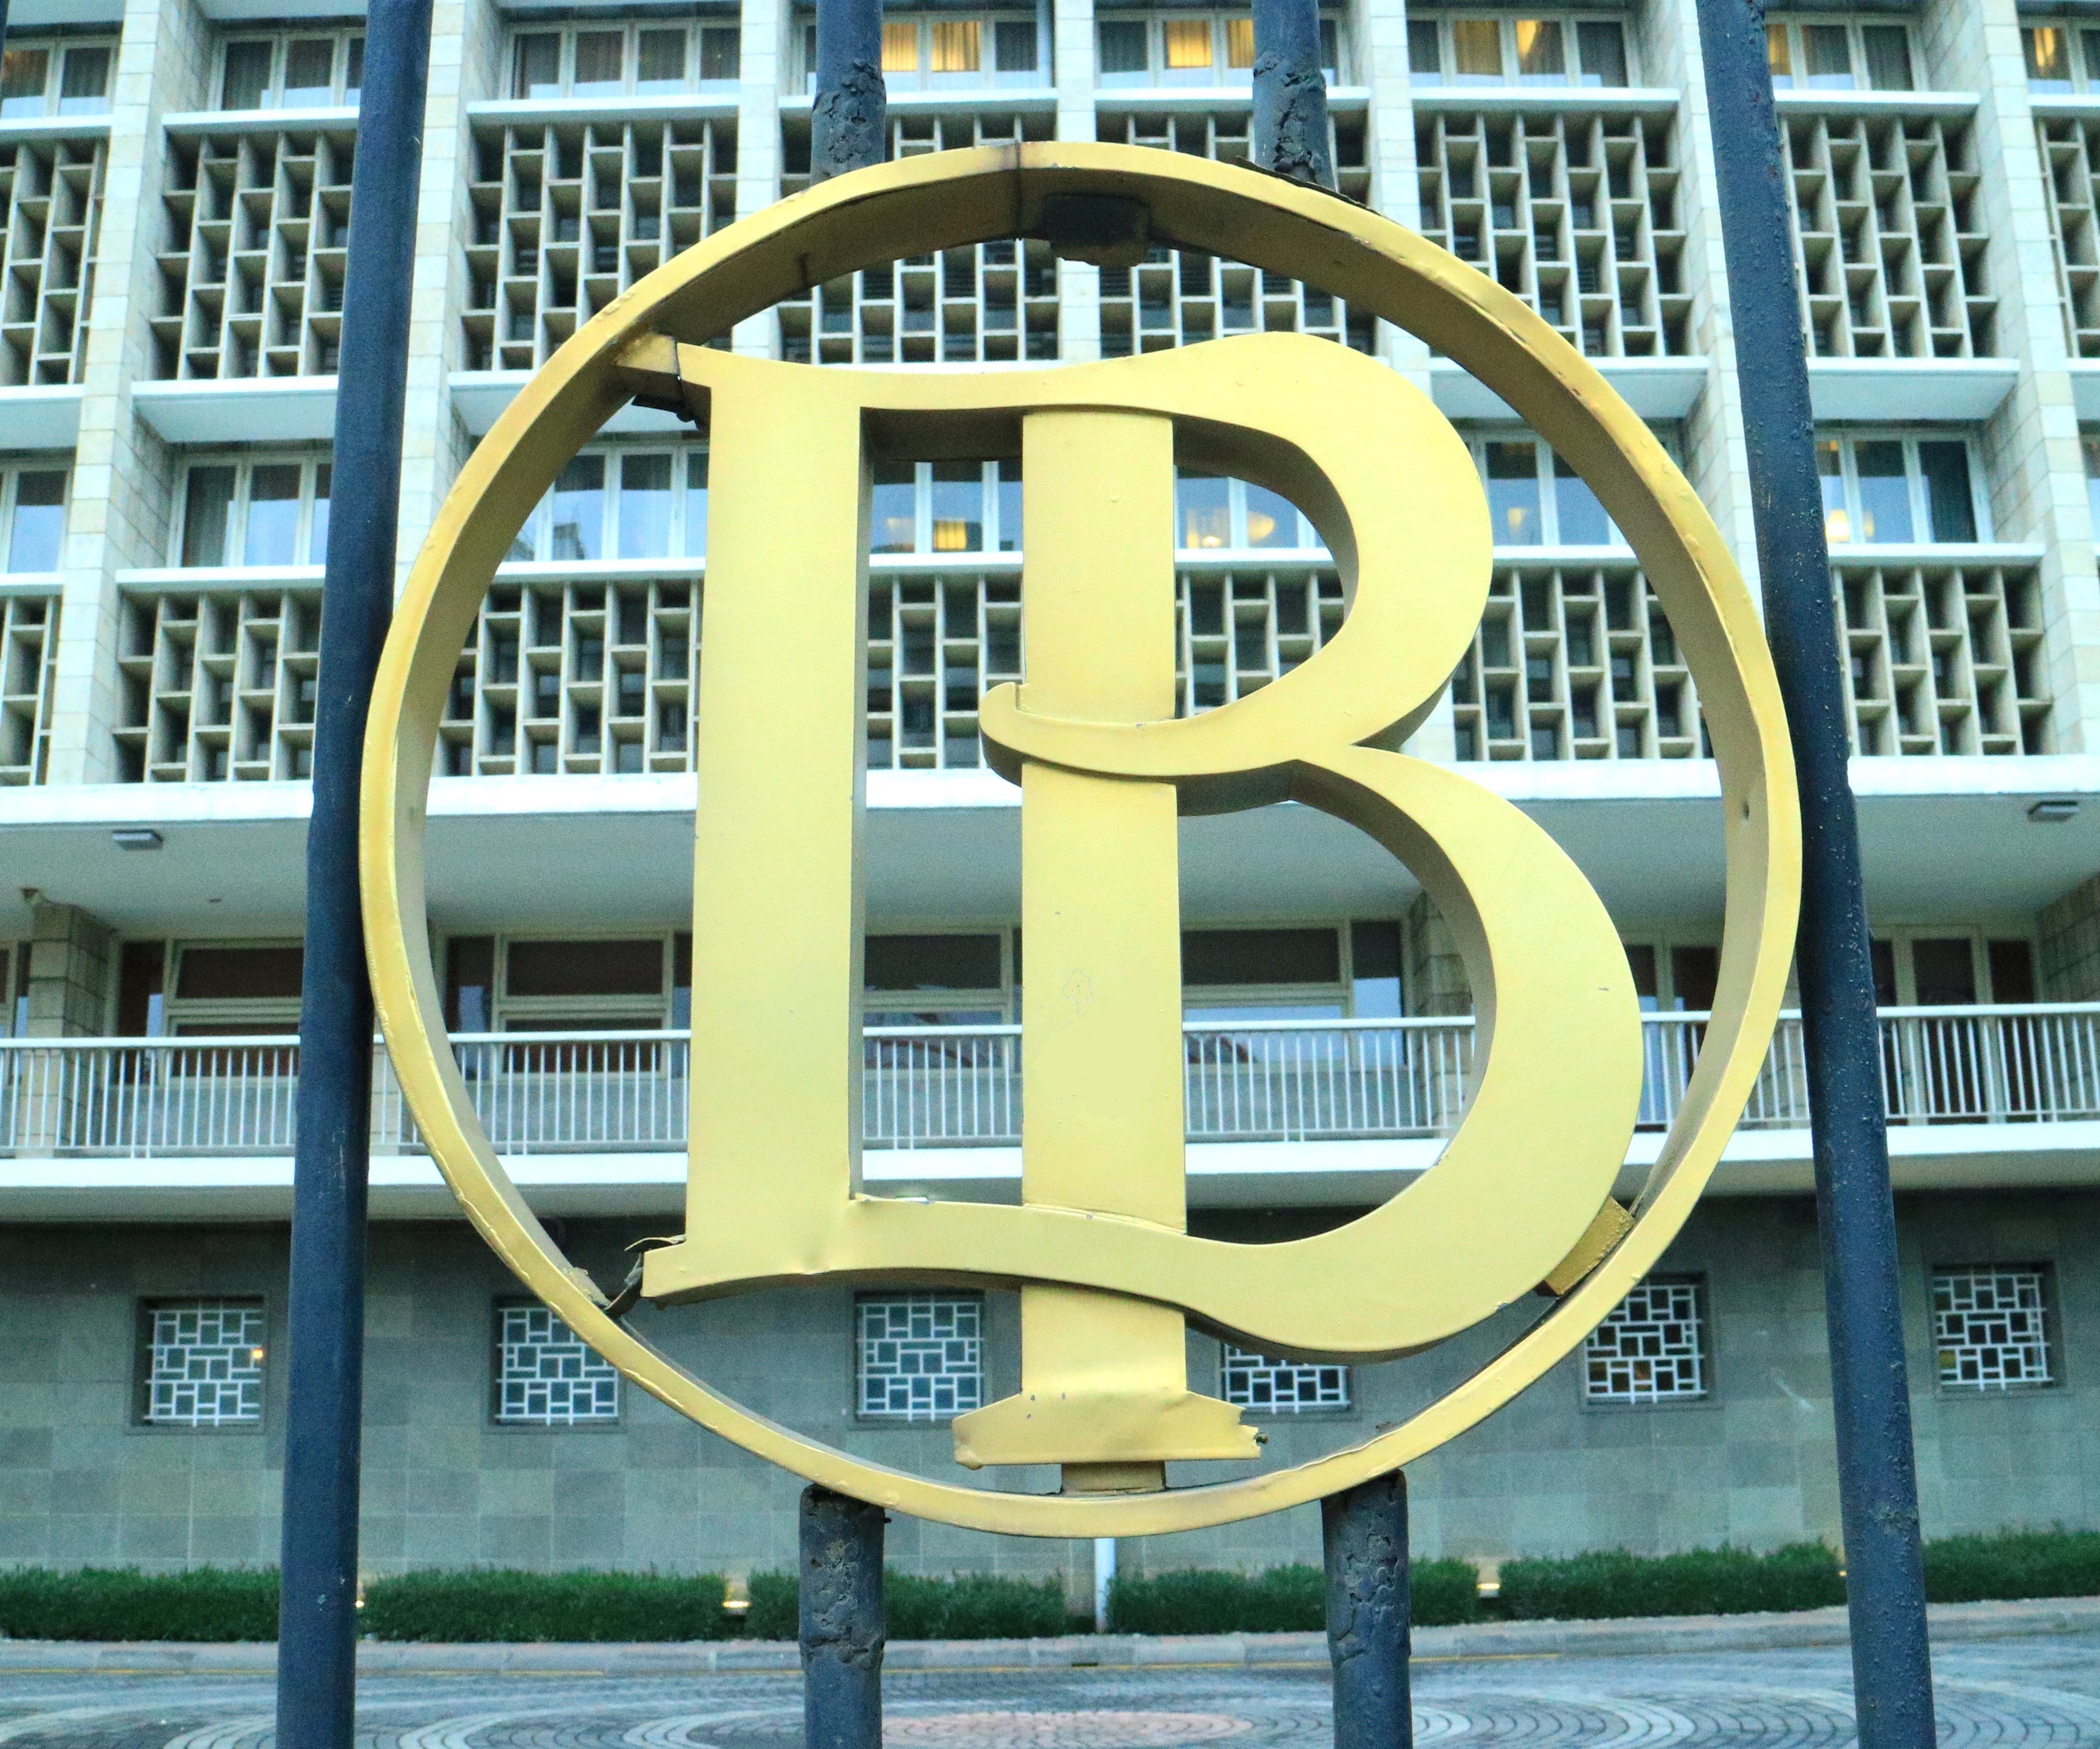 Bank Indonesia: Do Not Sell, Buy, Trade Cryptocurrency